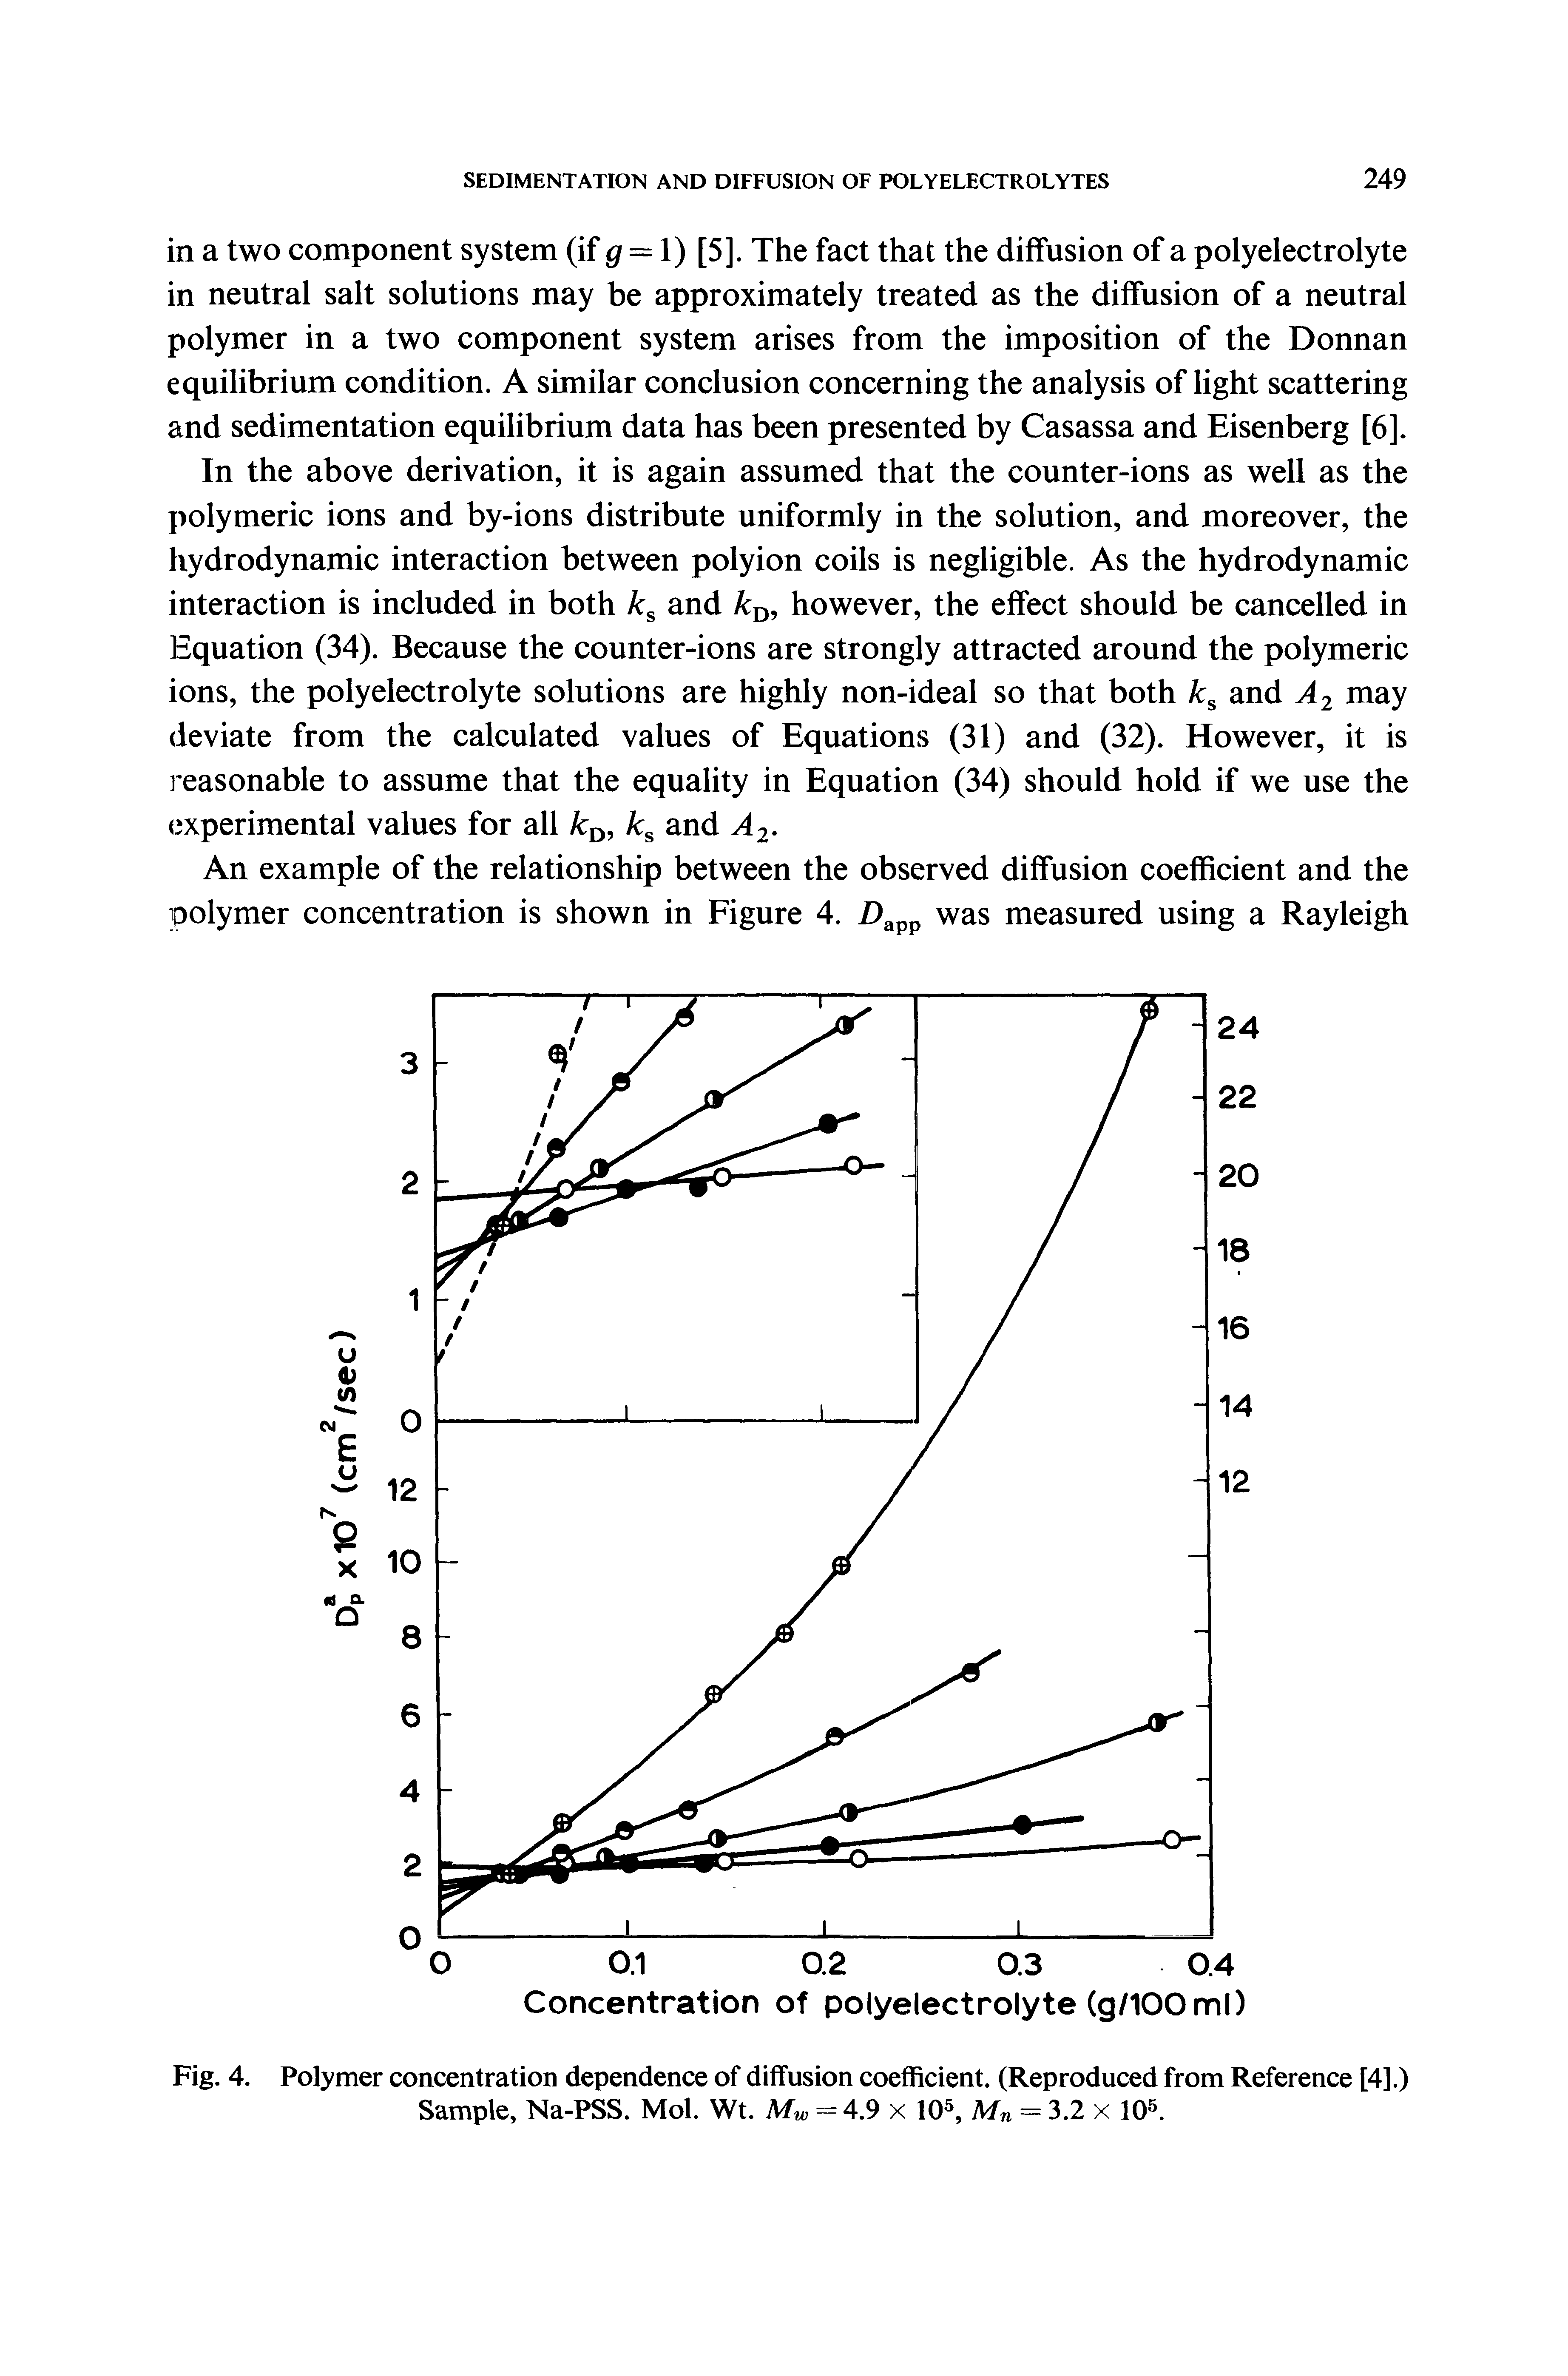 Fig. 4. Polymer concentration dependence of diffusion coefficient. (Reproduced from Reference [4].) Sample, Na-PSS. Mol. Wt. Mw = 4.9 x 10, Mn = 3.2 x lO. ...